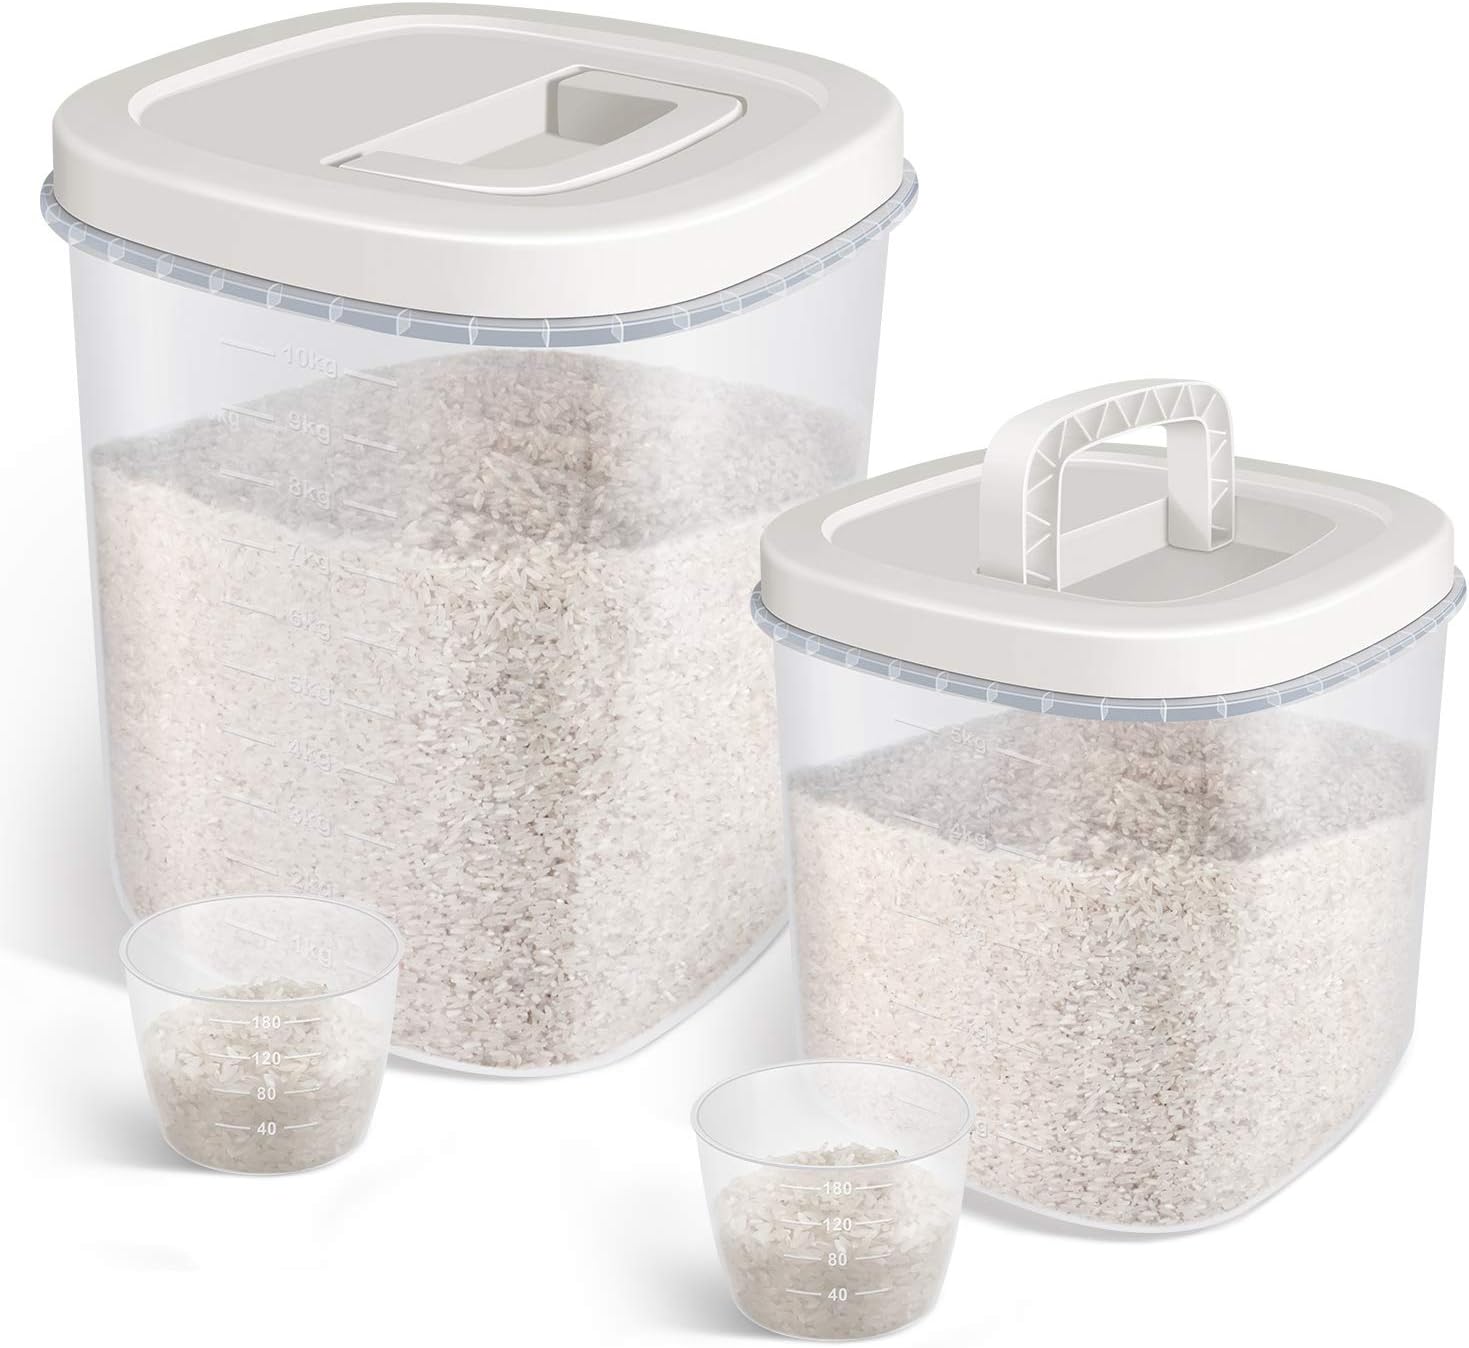 How To Store Rice Long-Term In Buckets